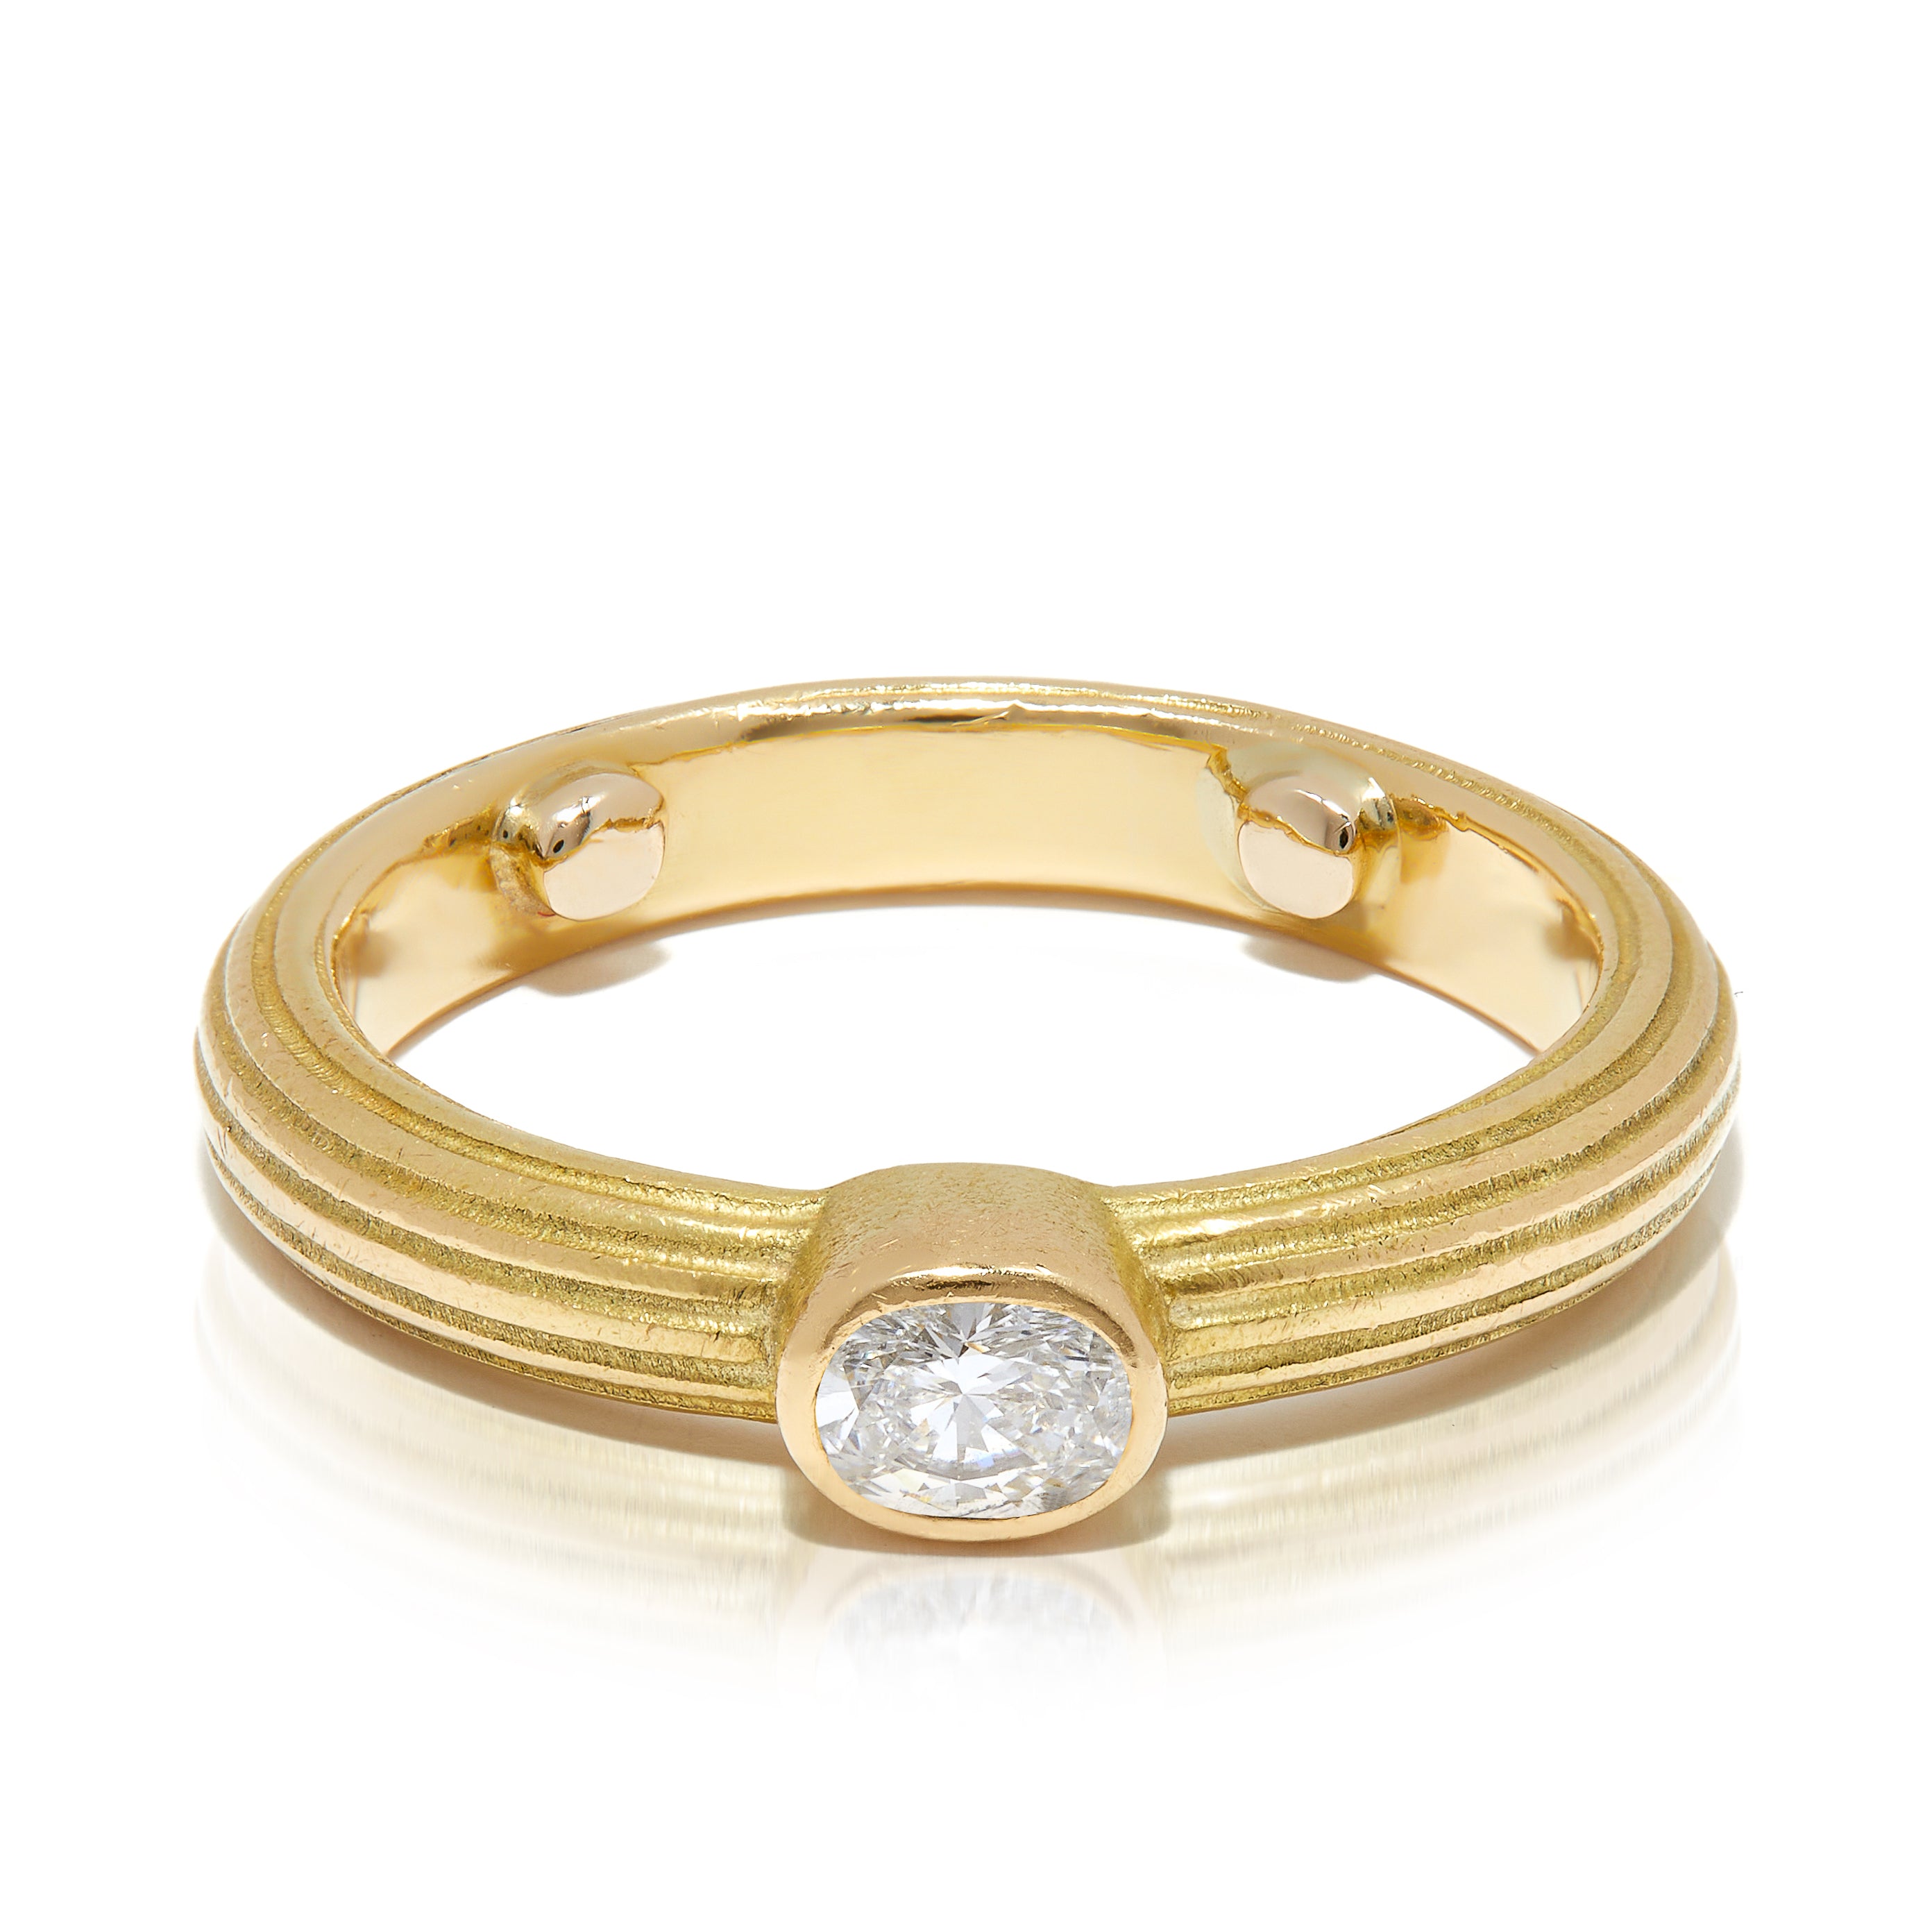 Fluted gold band ring with oval-cut diamond centre. 